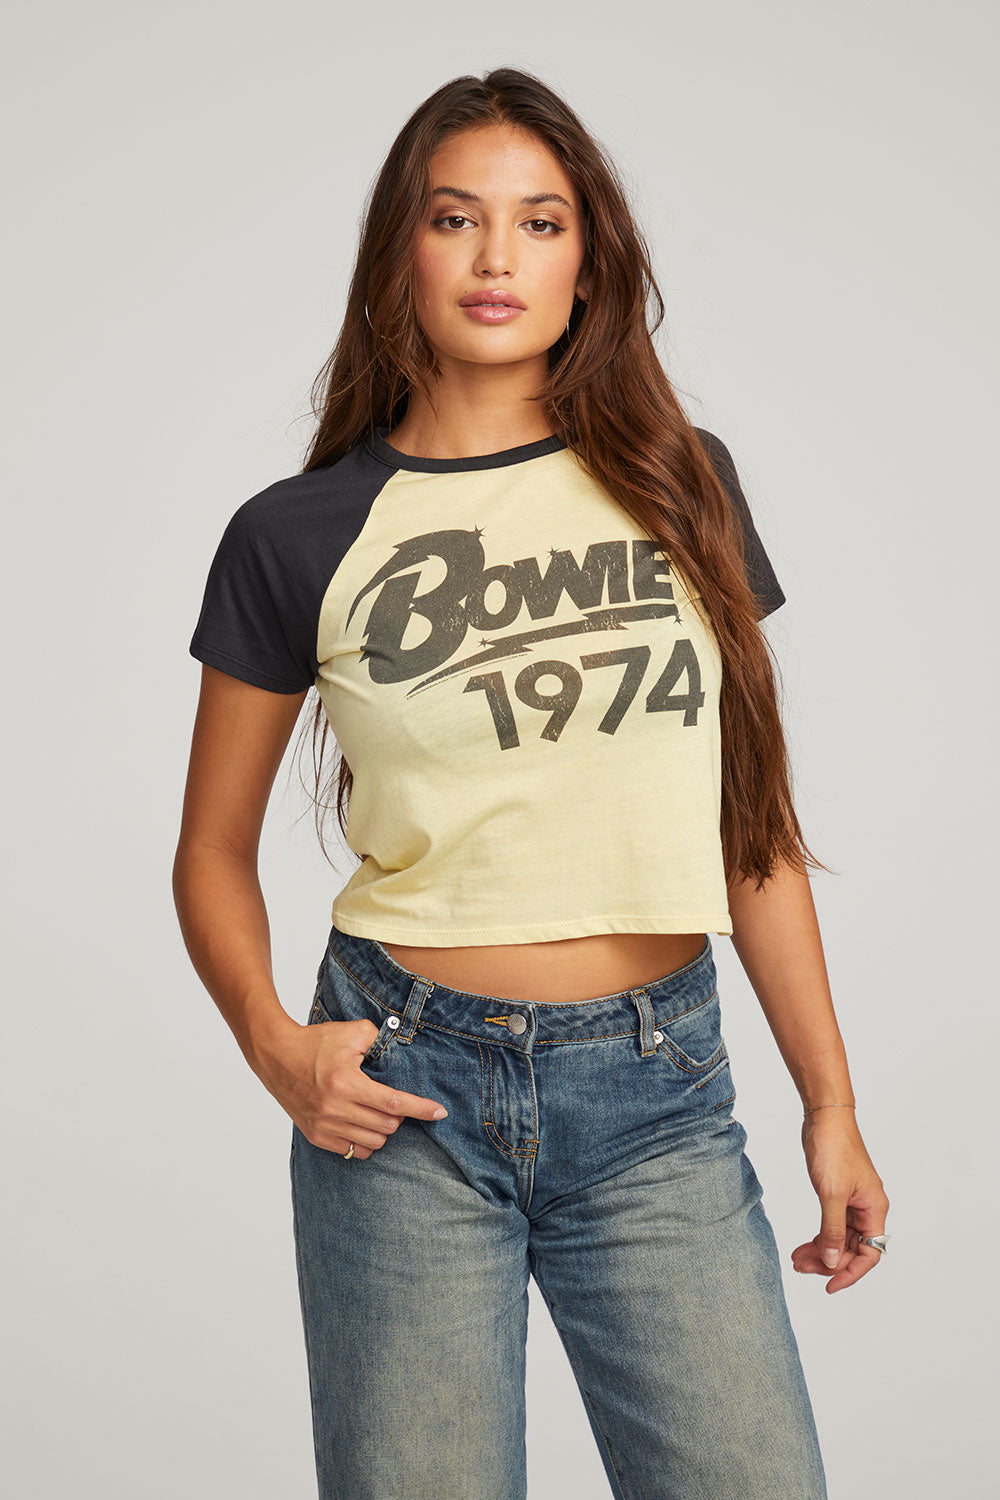 David Bowie 1974 Tee WOMENS chaserbrand